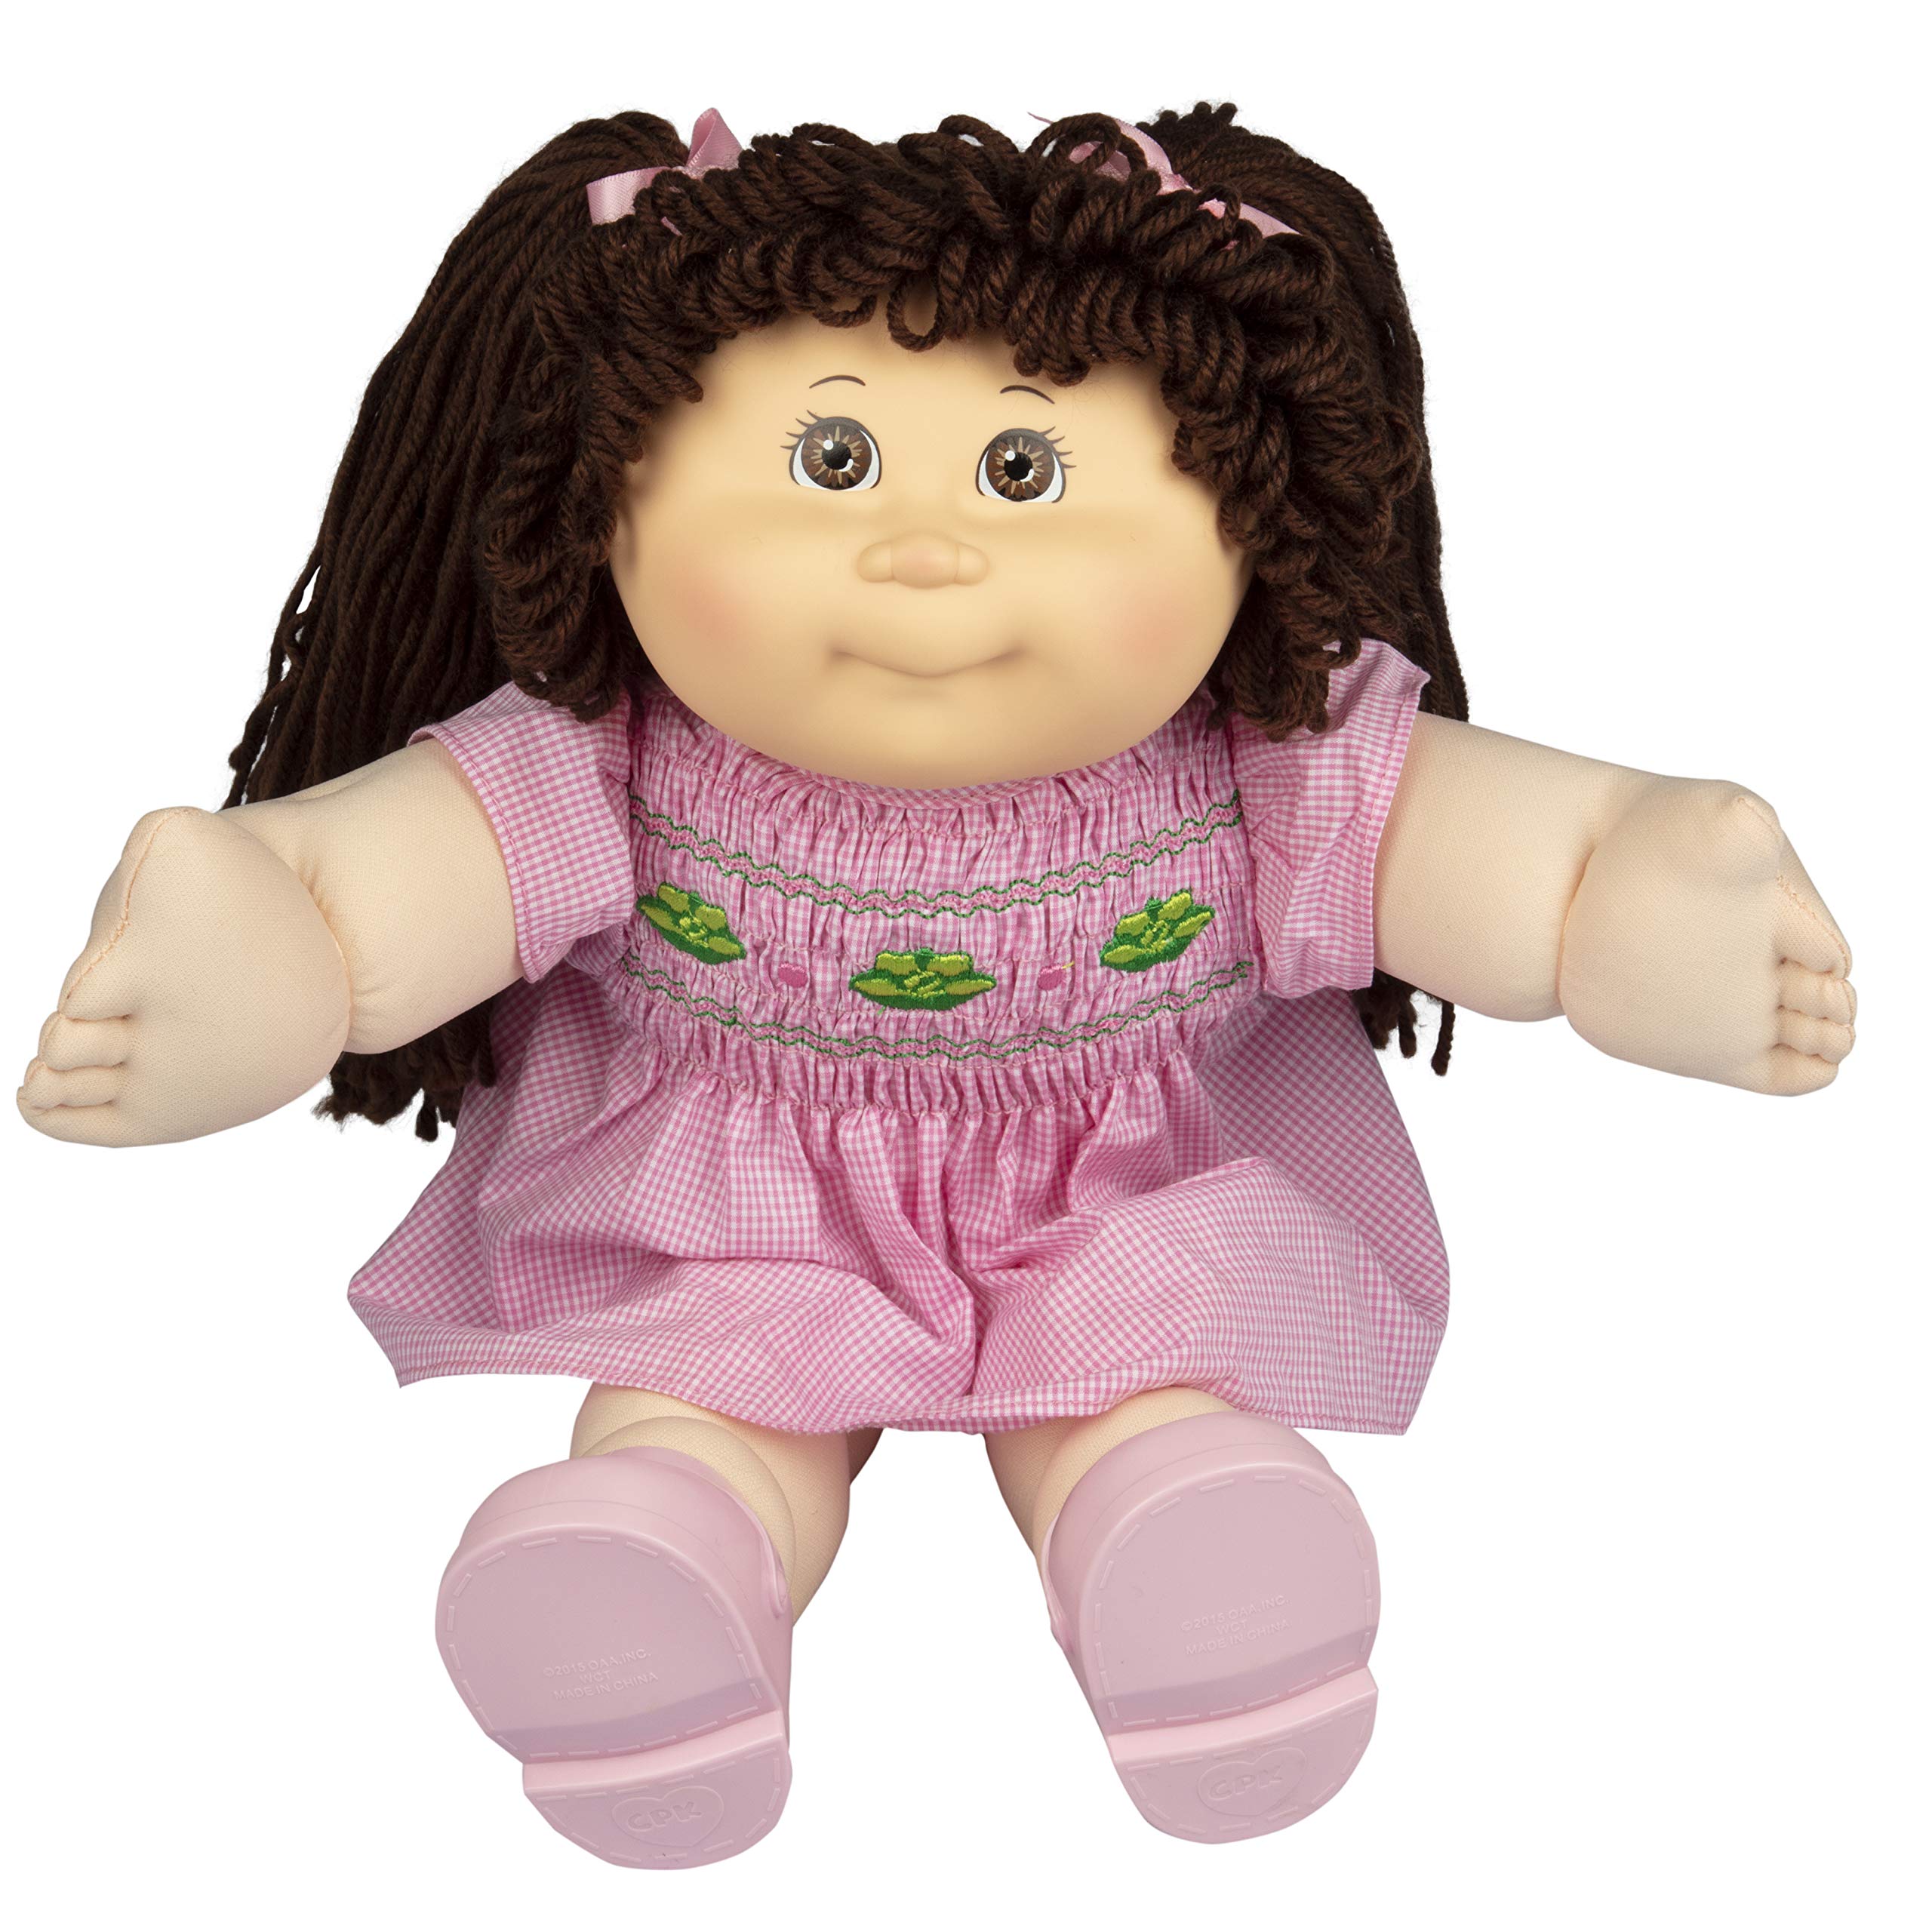 cabbage badge doll